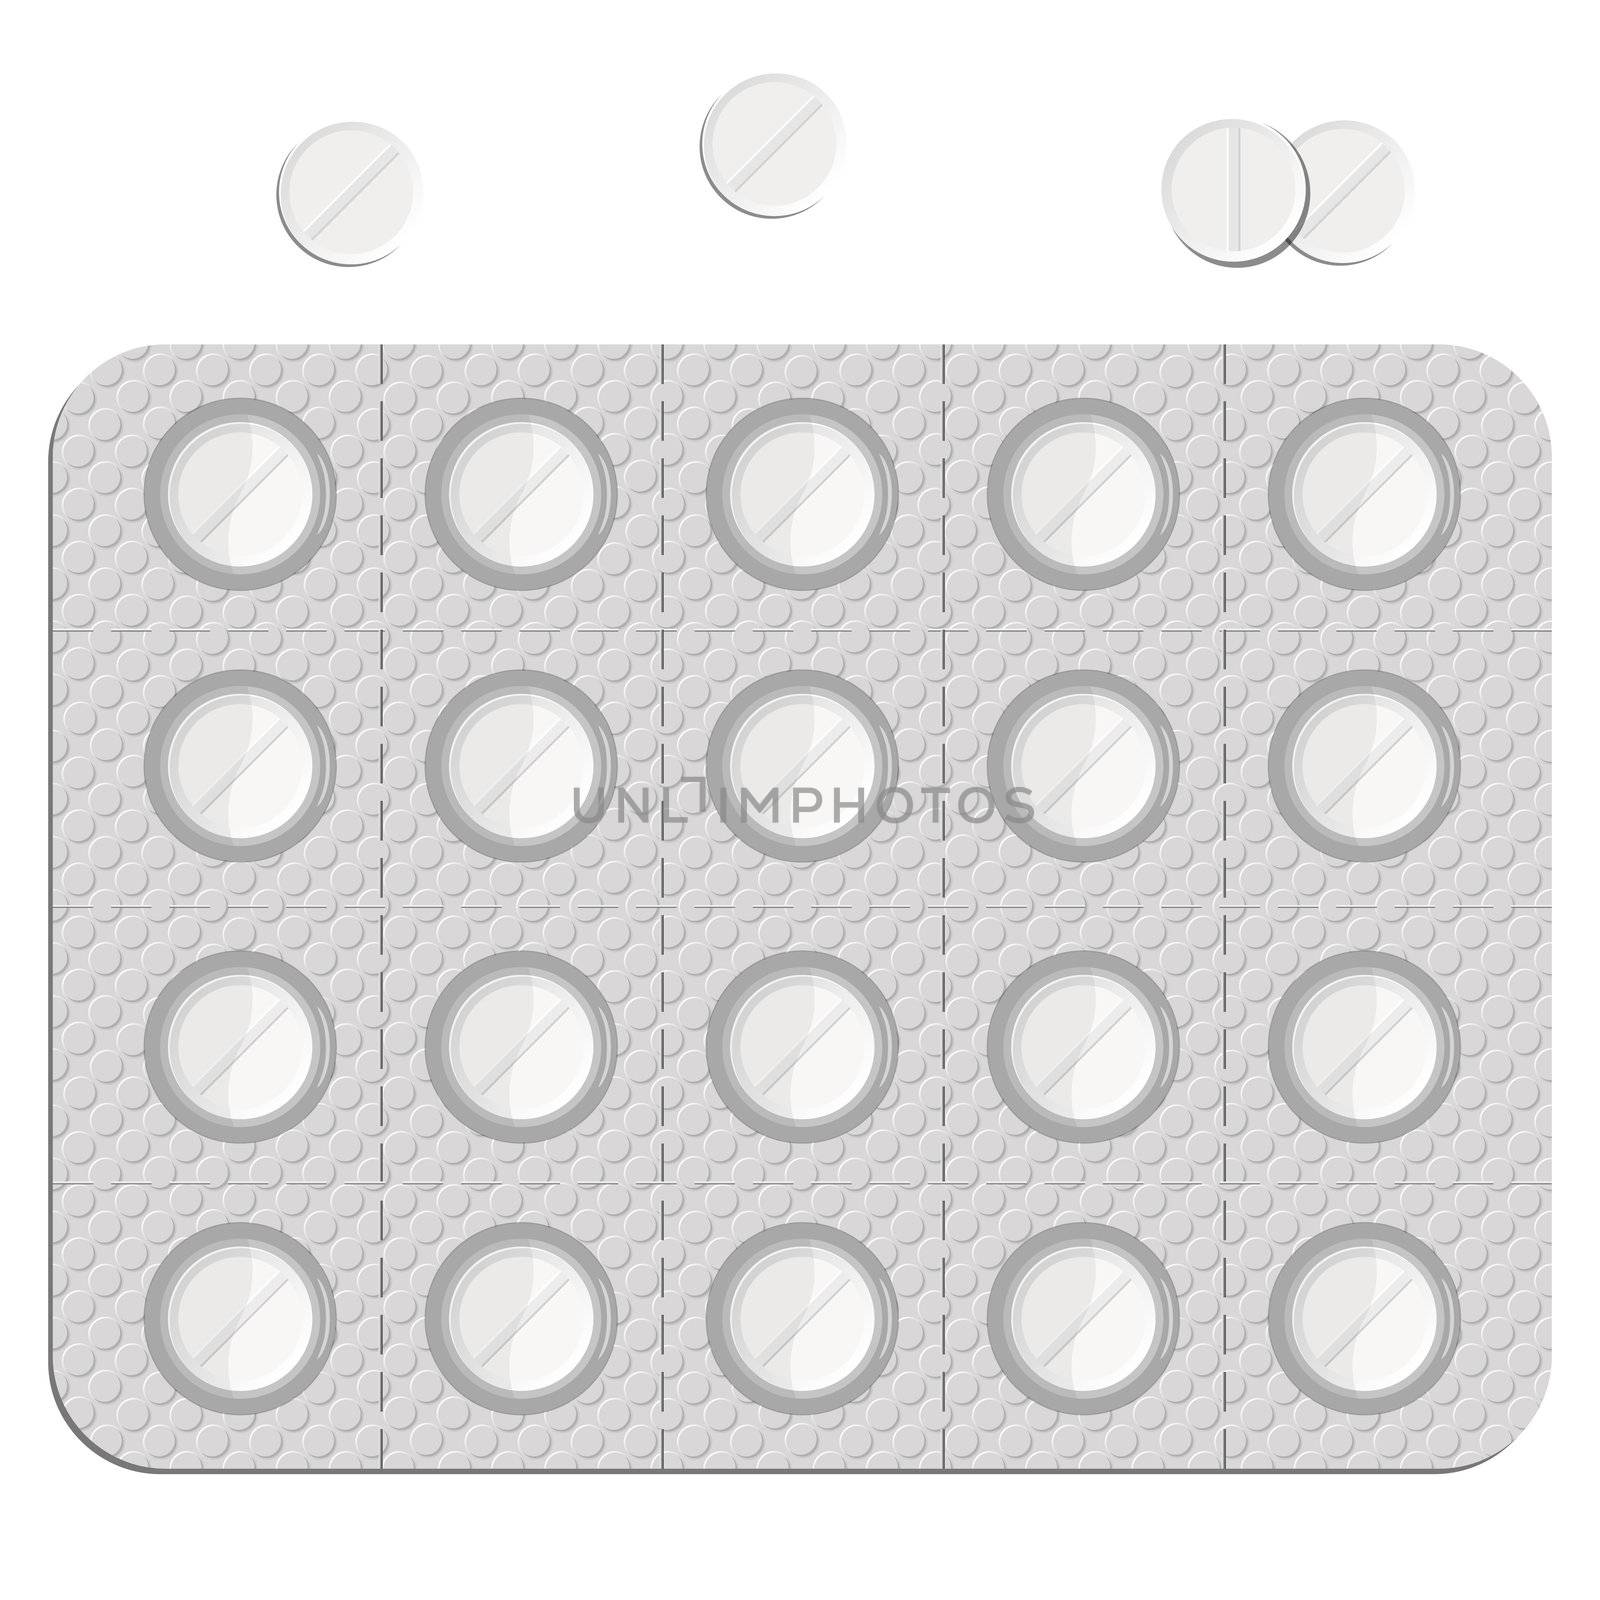 pills in a blister pack and isolated against white background, abstract vector art illustration; image contains transparency